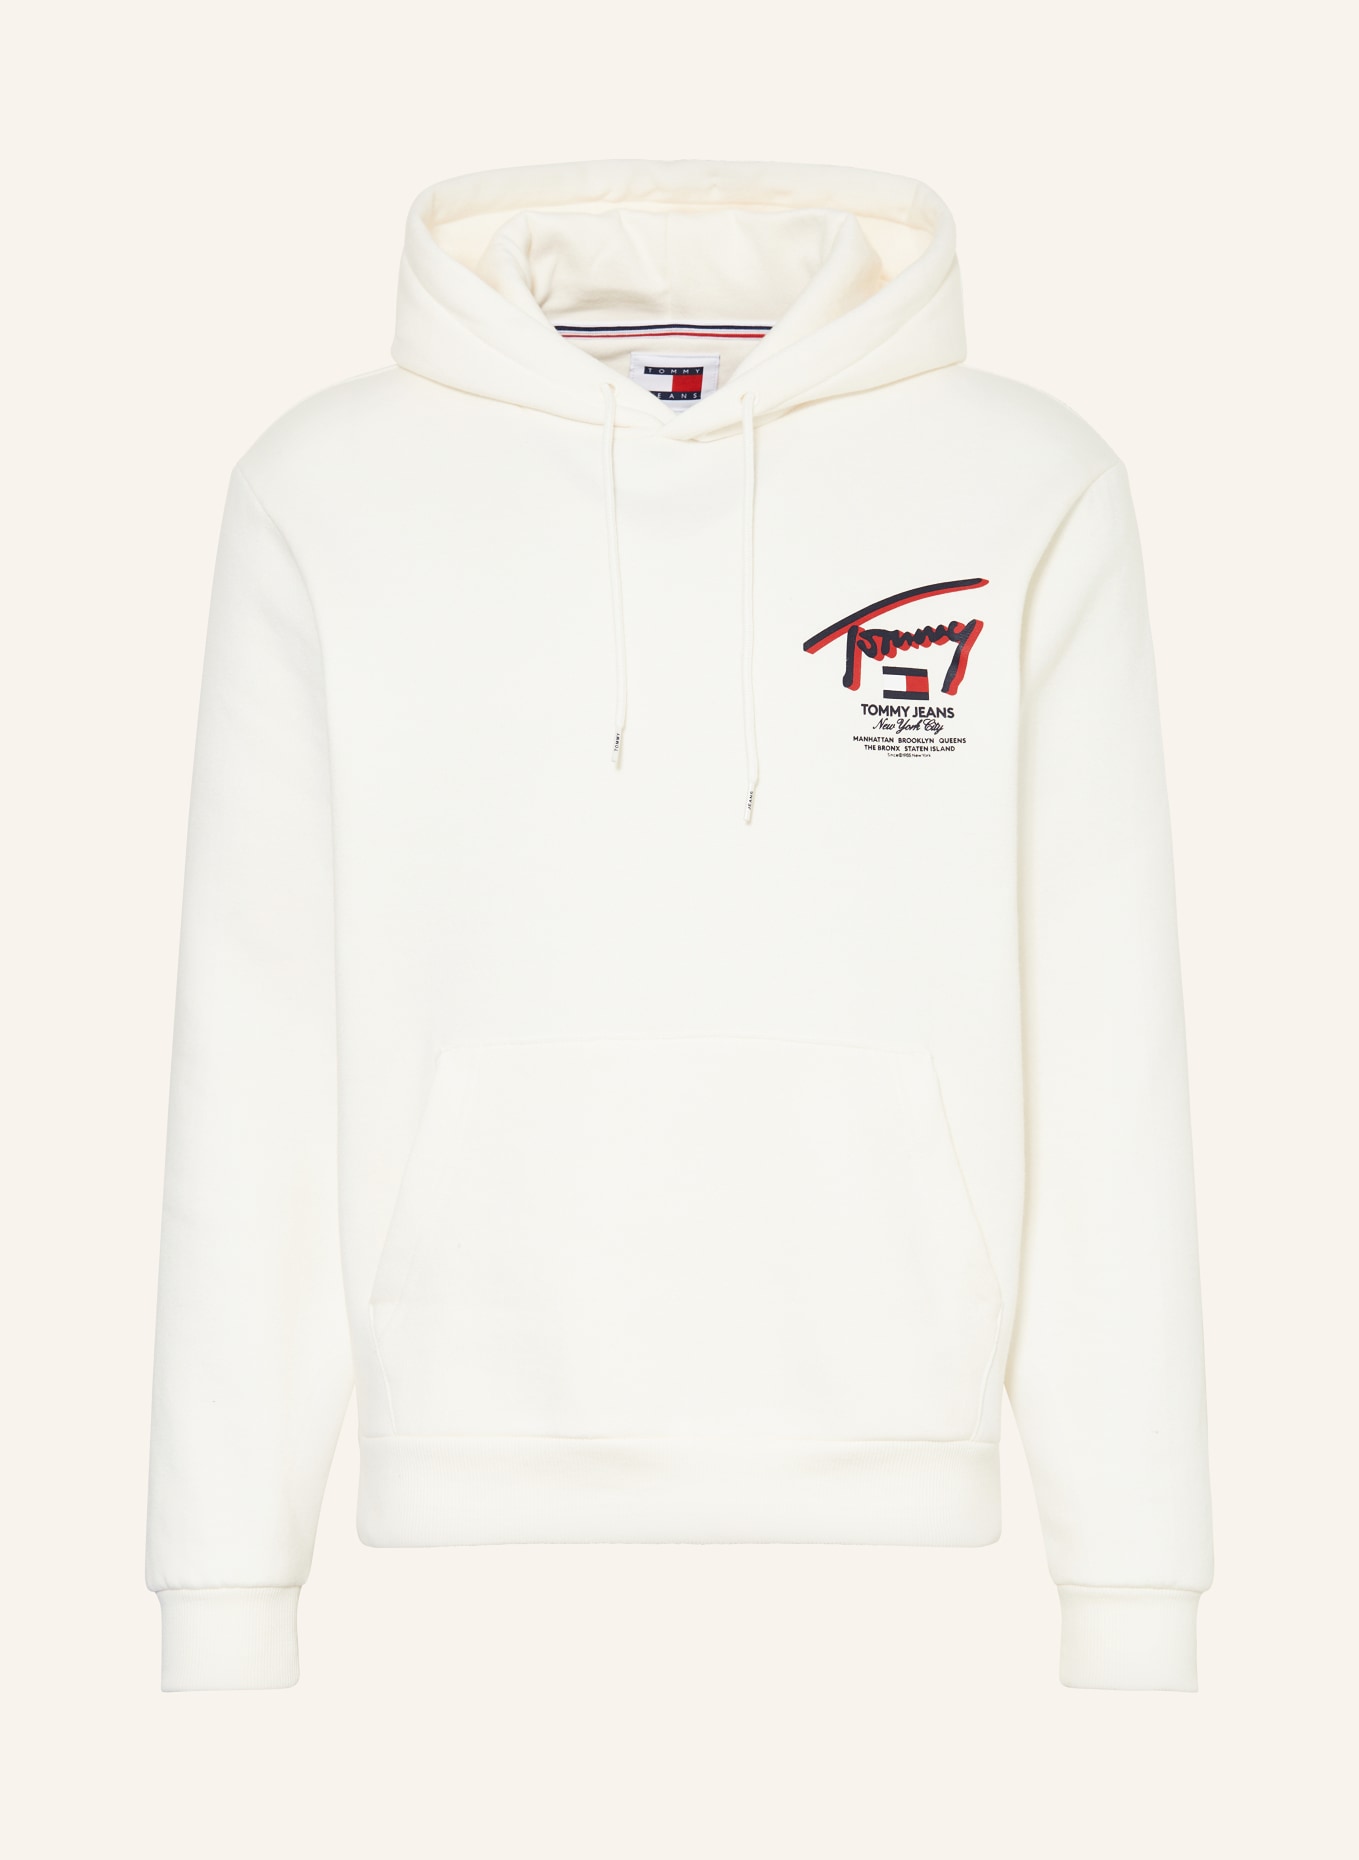 TOMMY JEANS Hoodie, Farbe: WEISS (Bild 1)